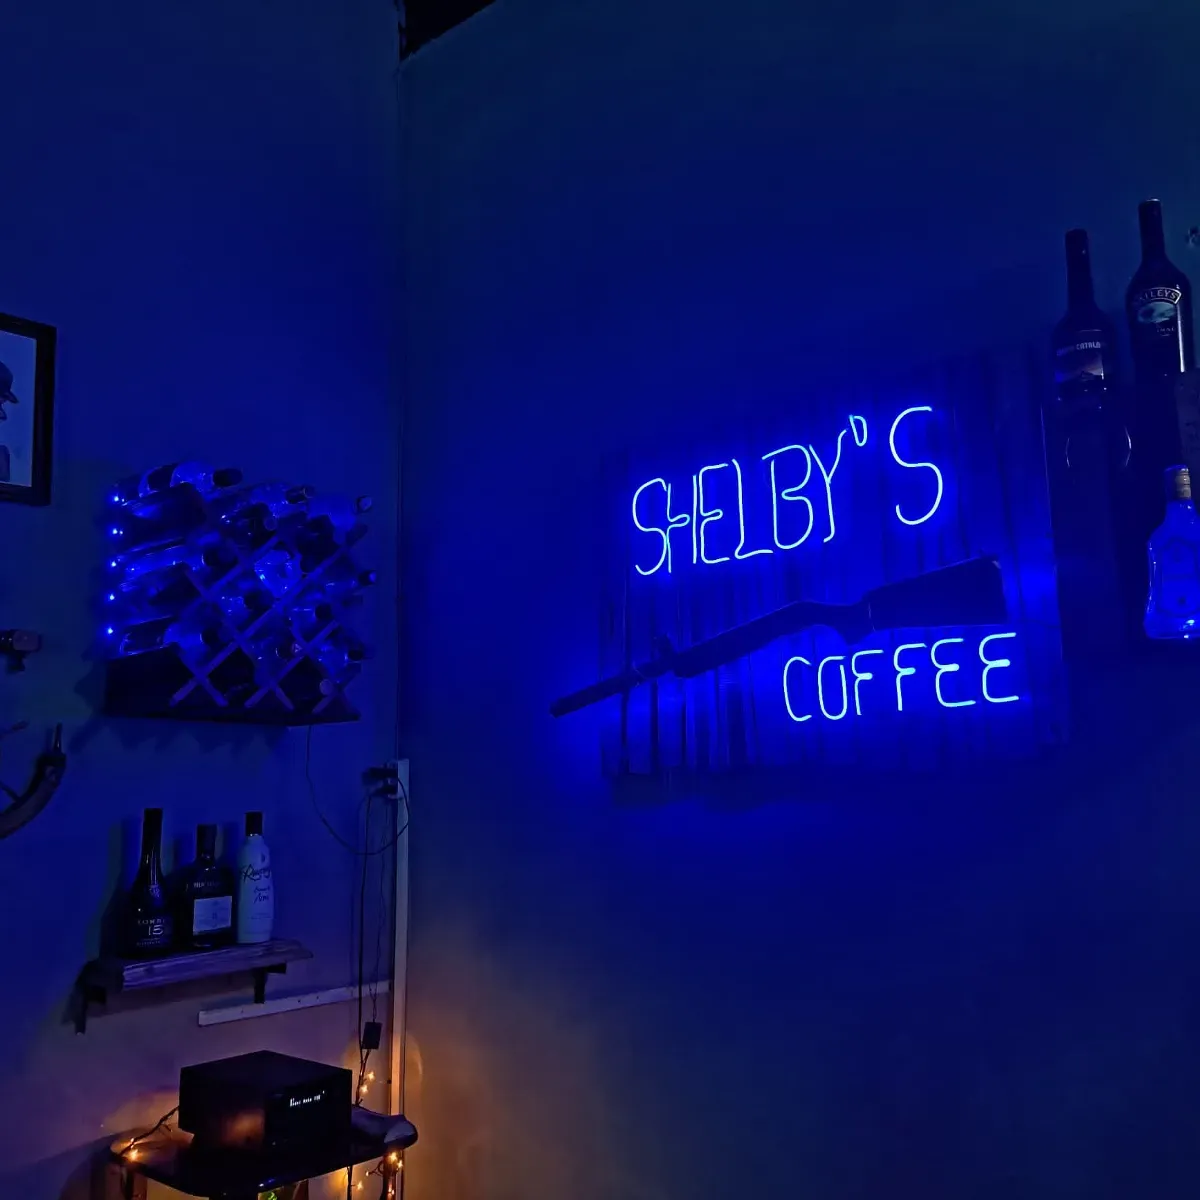 Shelby's Coffee